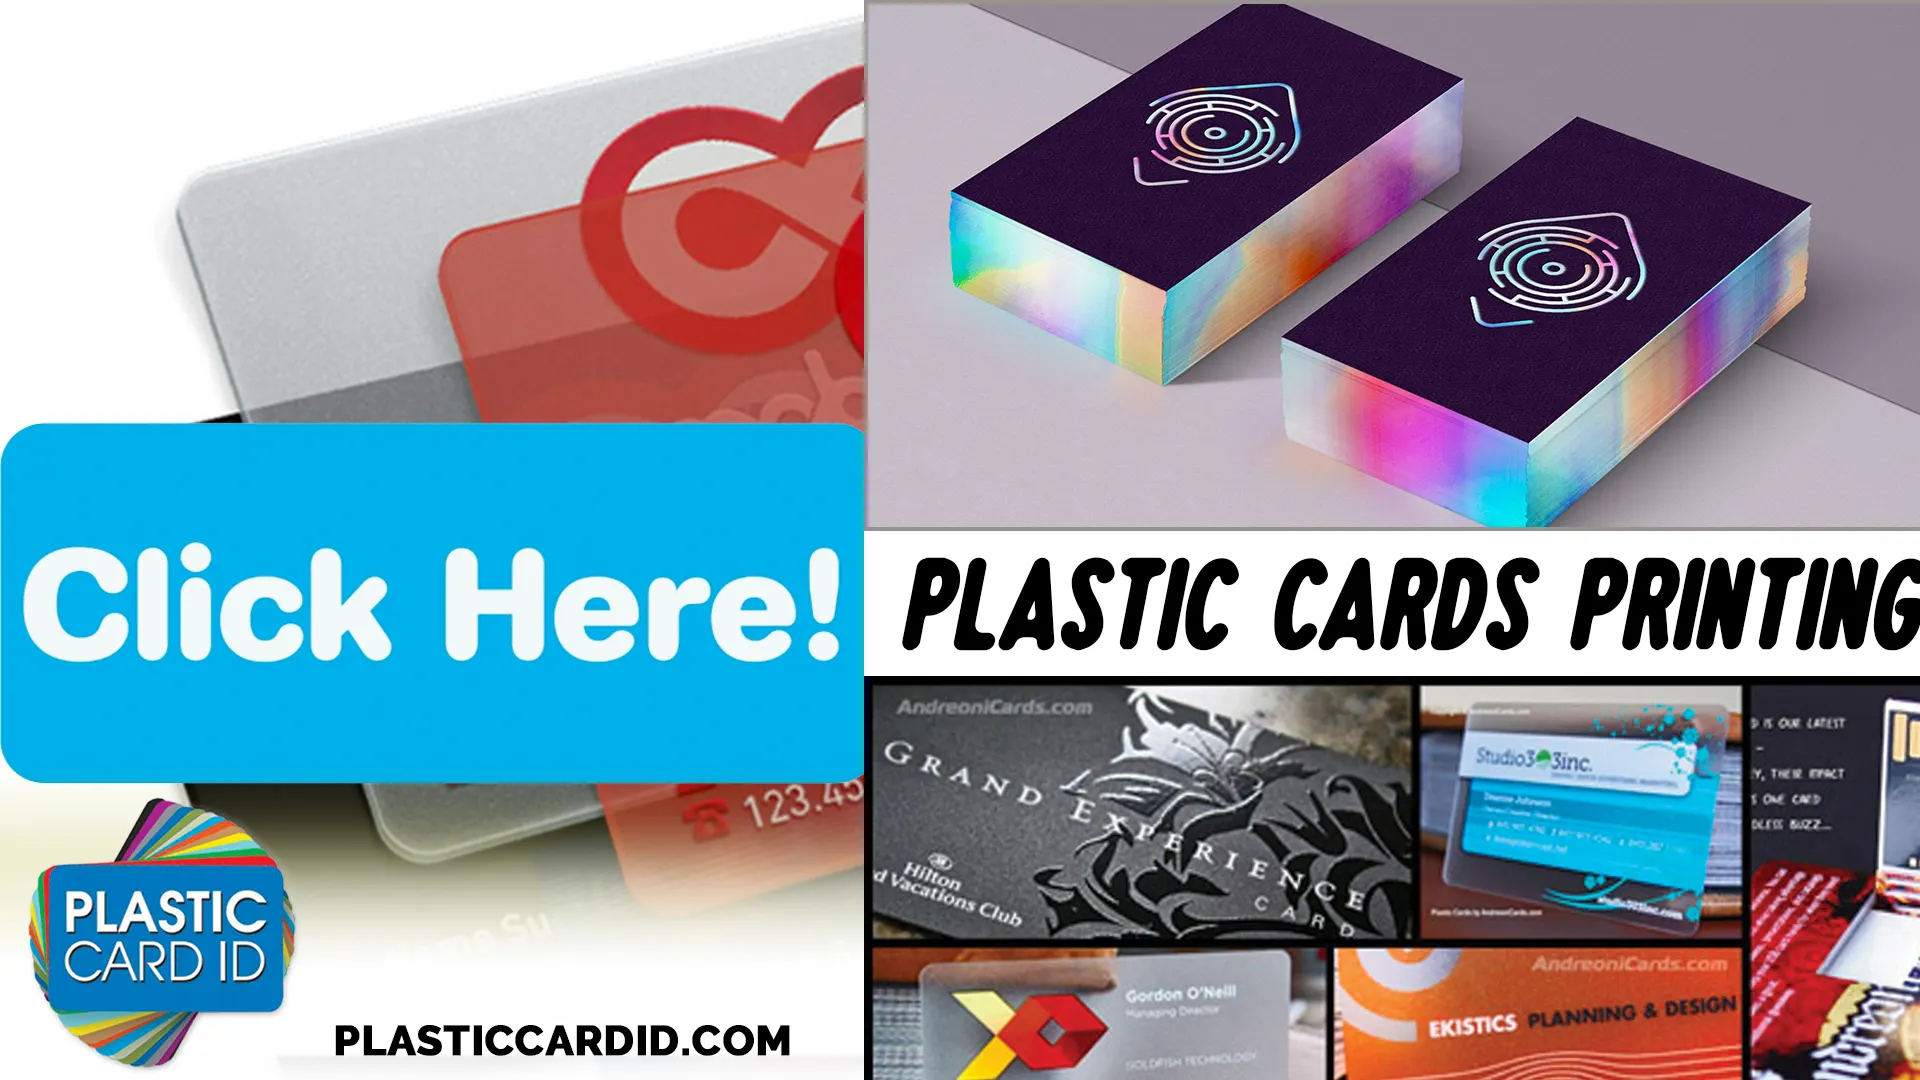 In Your Service: The Life of a Plastic Card